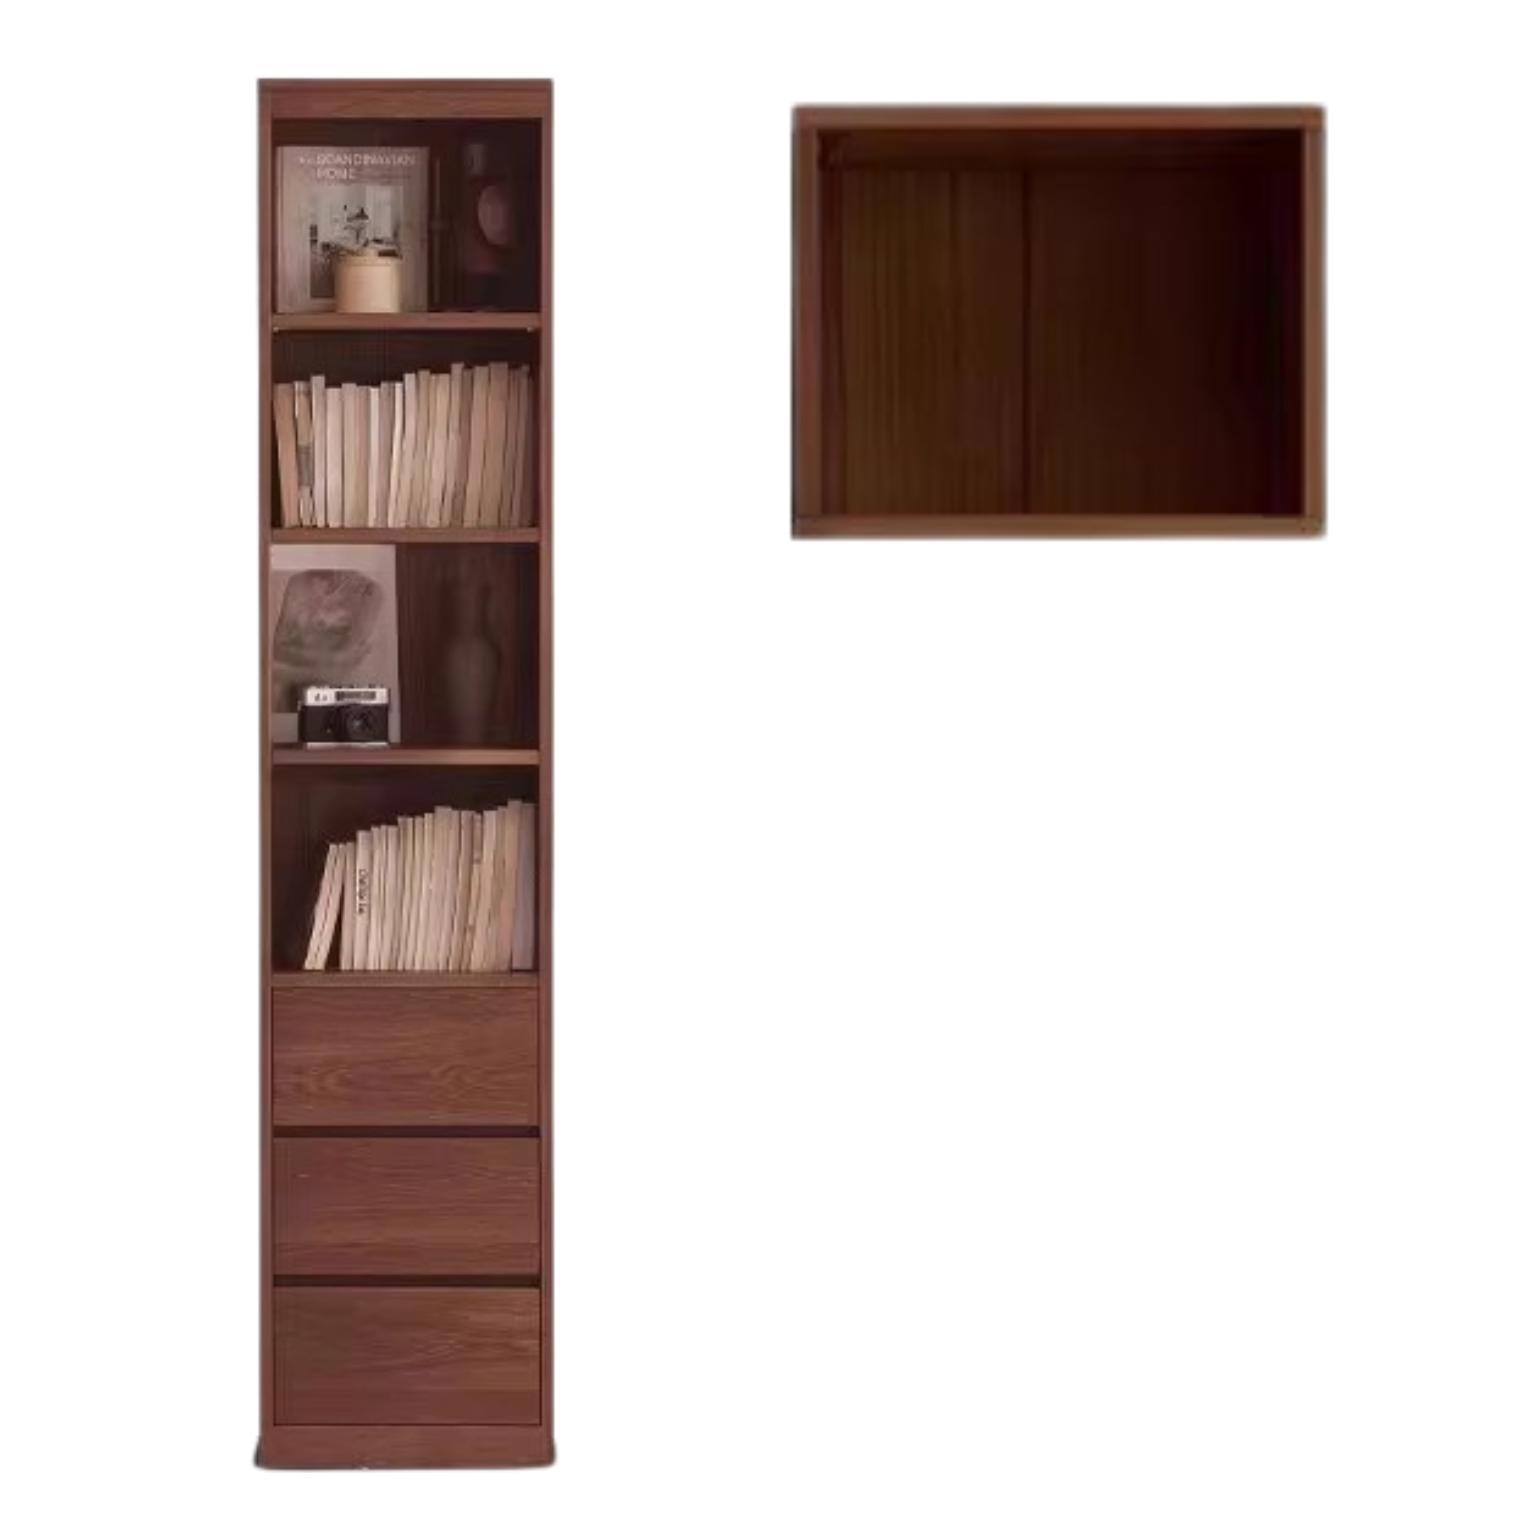 Oak solid wood bookcase modern with glass door -